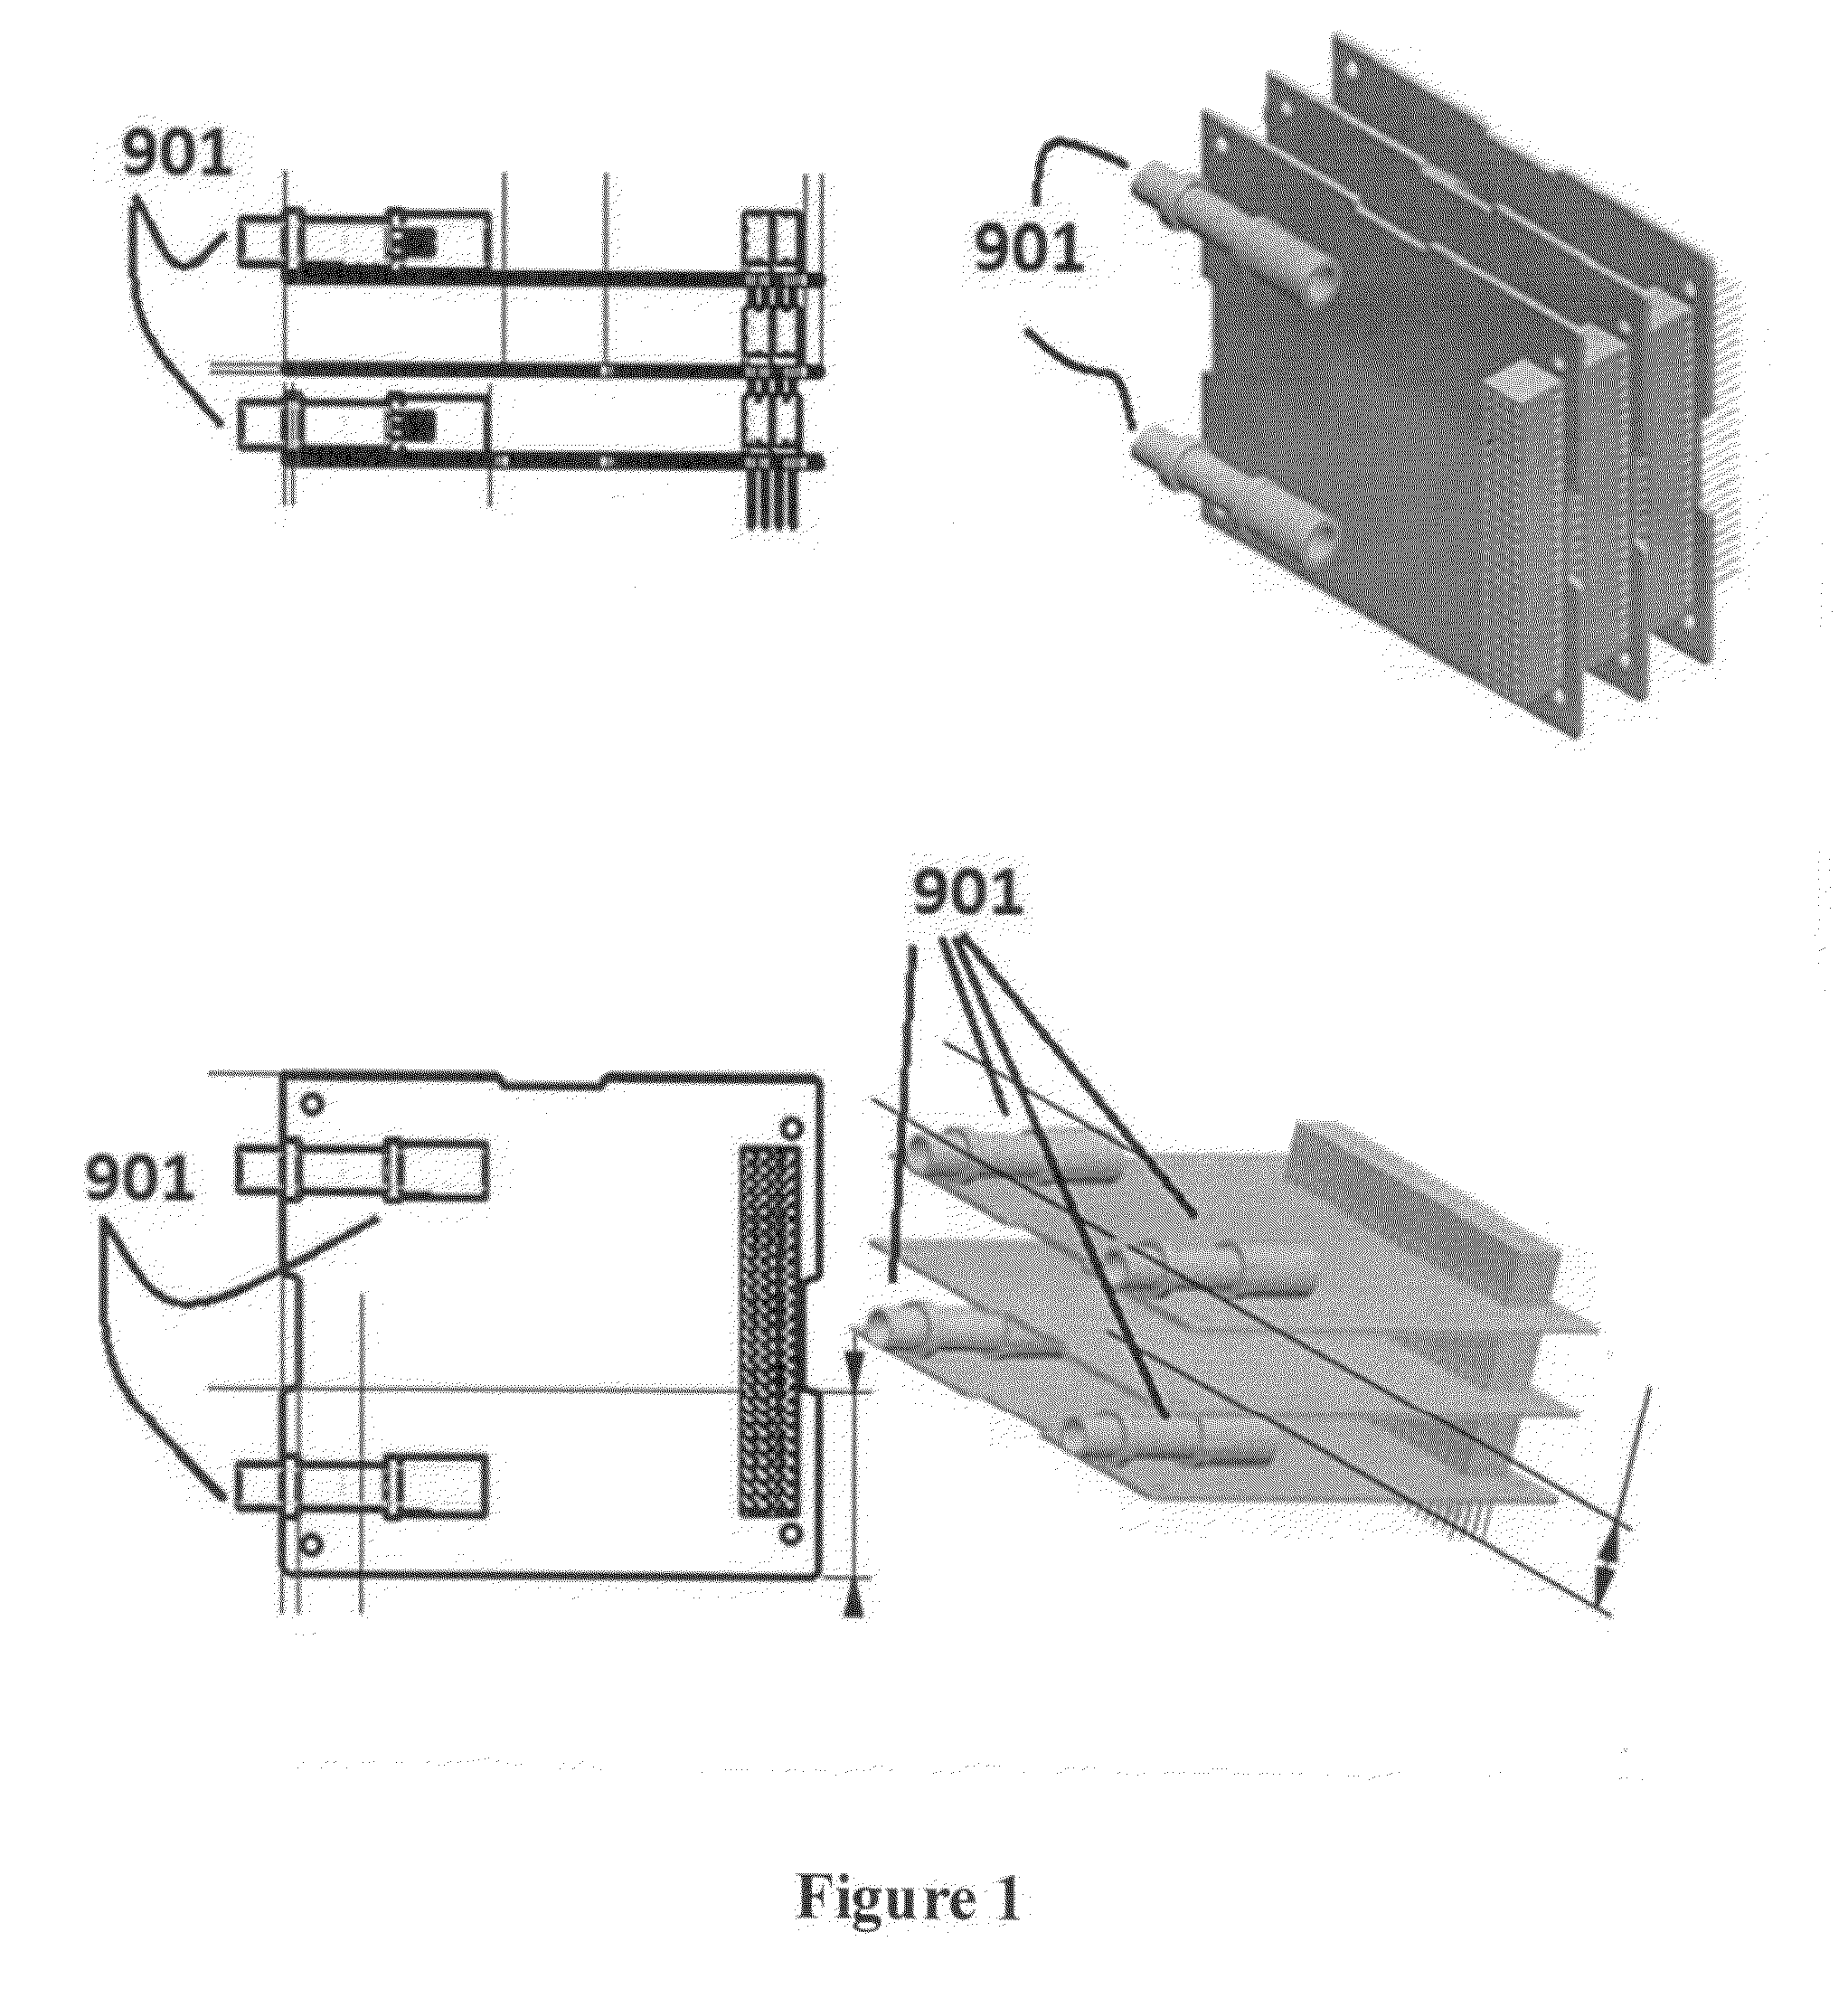 Method and system for a programmable and fault tolerant pulsed plasma thruster